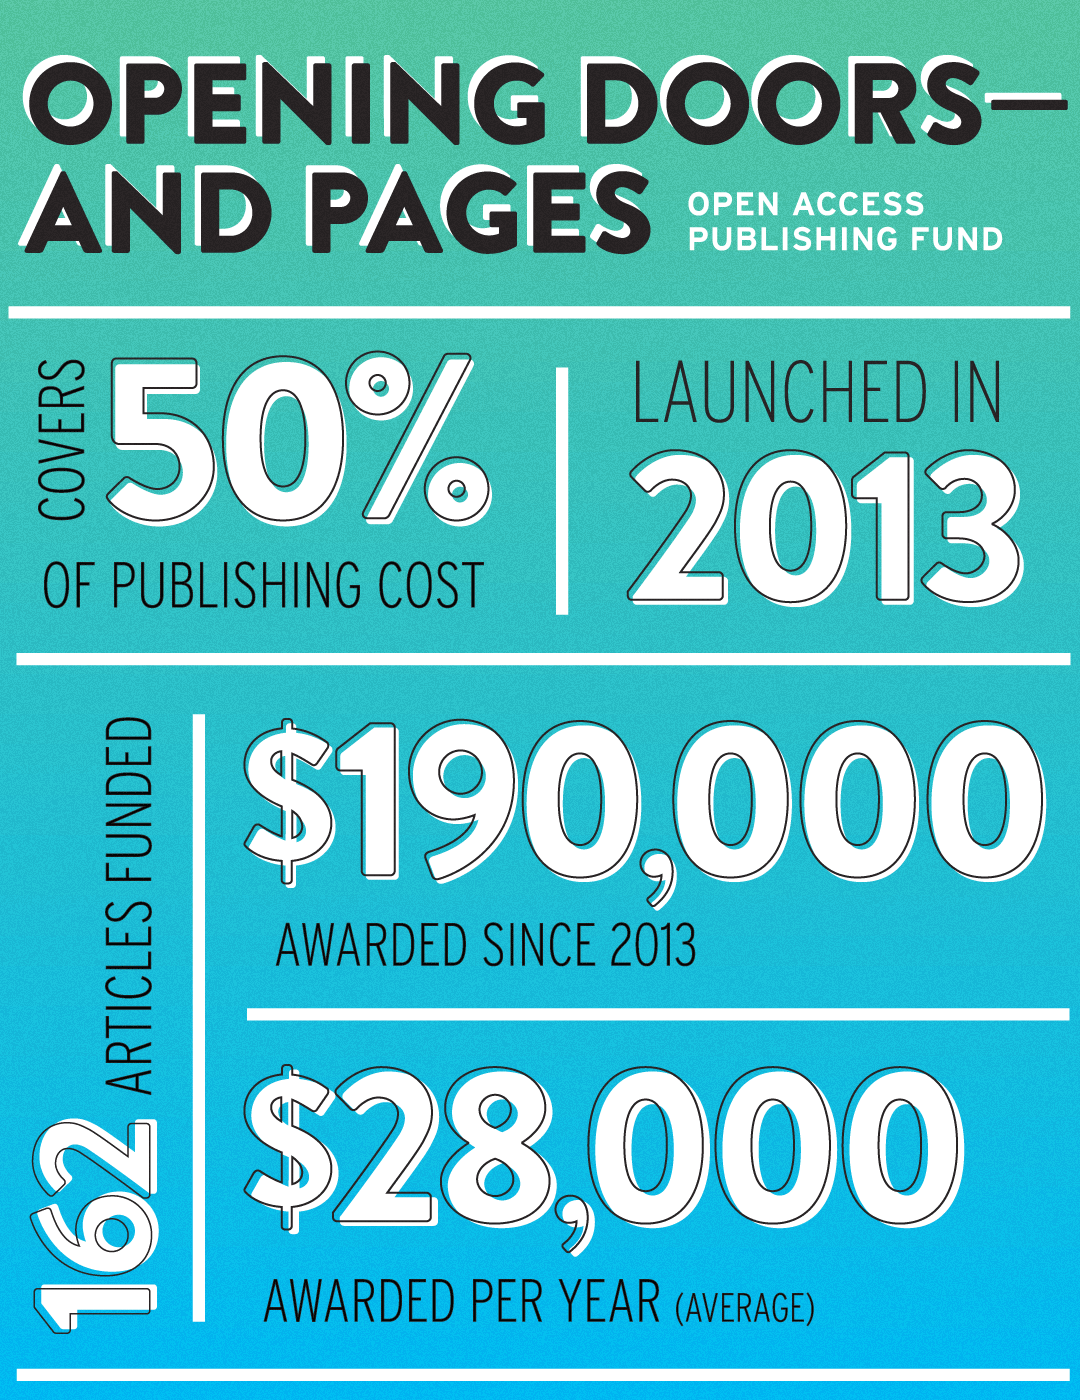 Opening Doors—and Pages: Open Access Publishing Fund. Covers 50% of publishing cost. Launched in 2013. 162 articles funded. $190,000 awarded since 2013. $28,000 awarded per year (average)